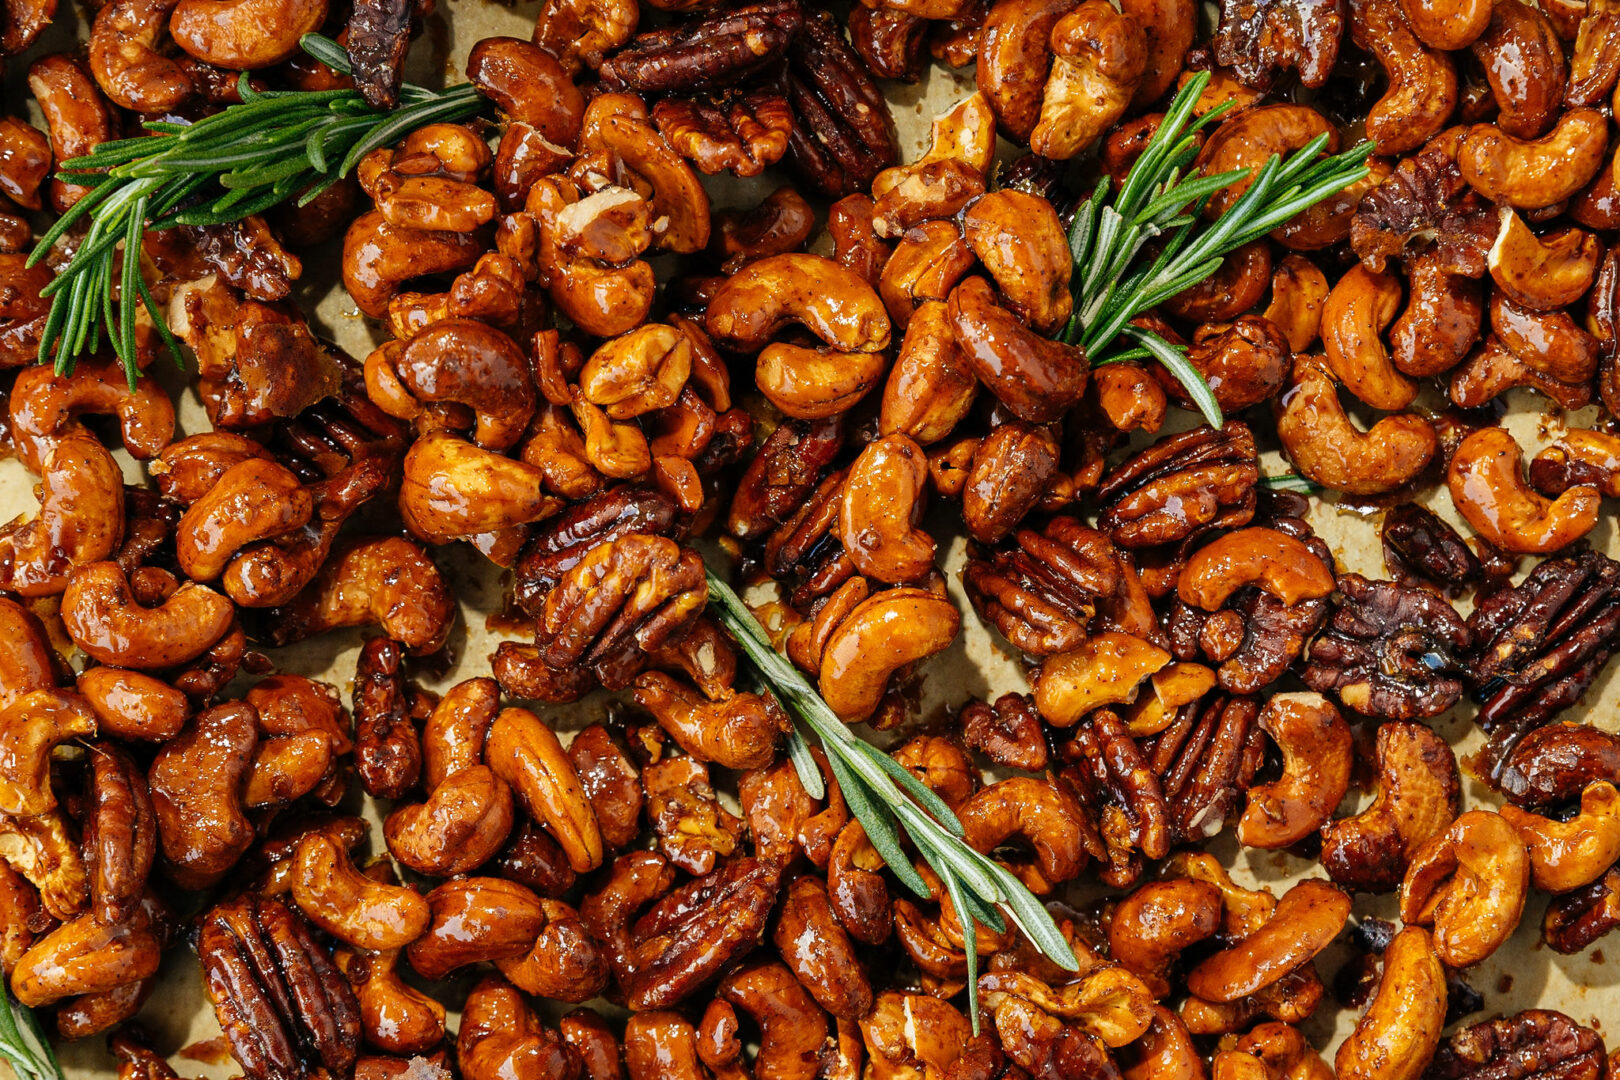 ROSEMARY & CHIPOTLE ROASTED NUTS